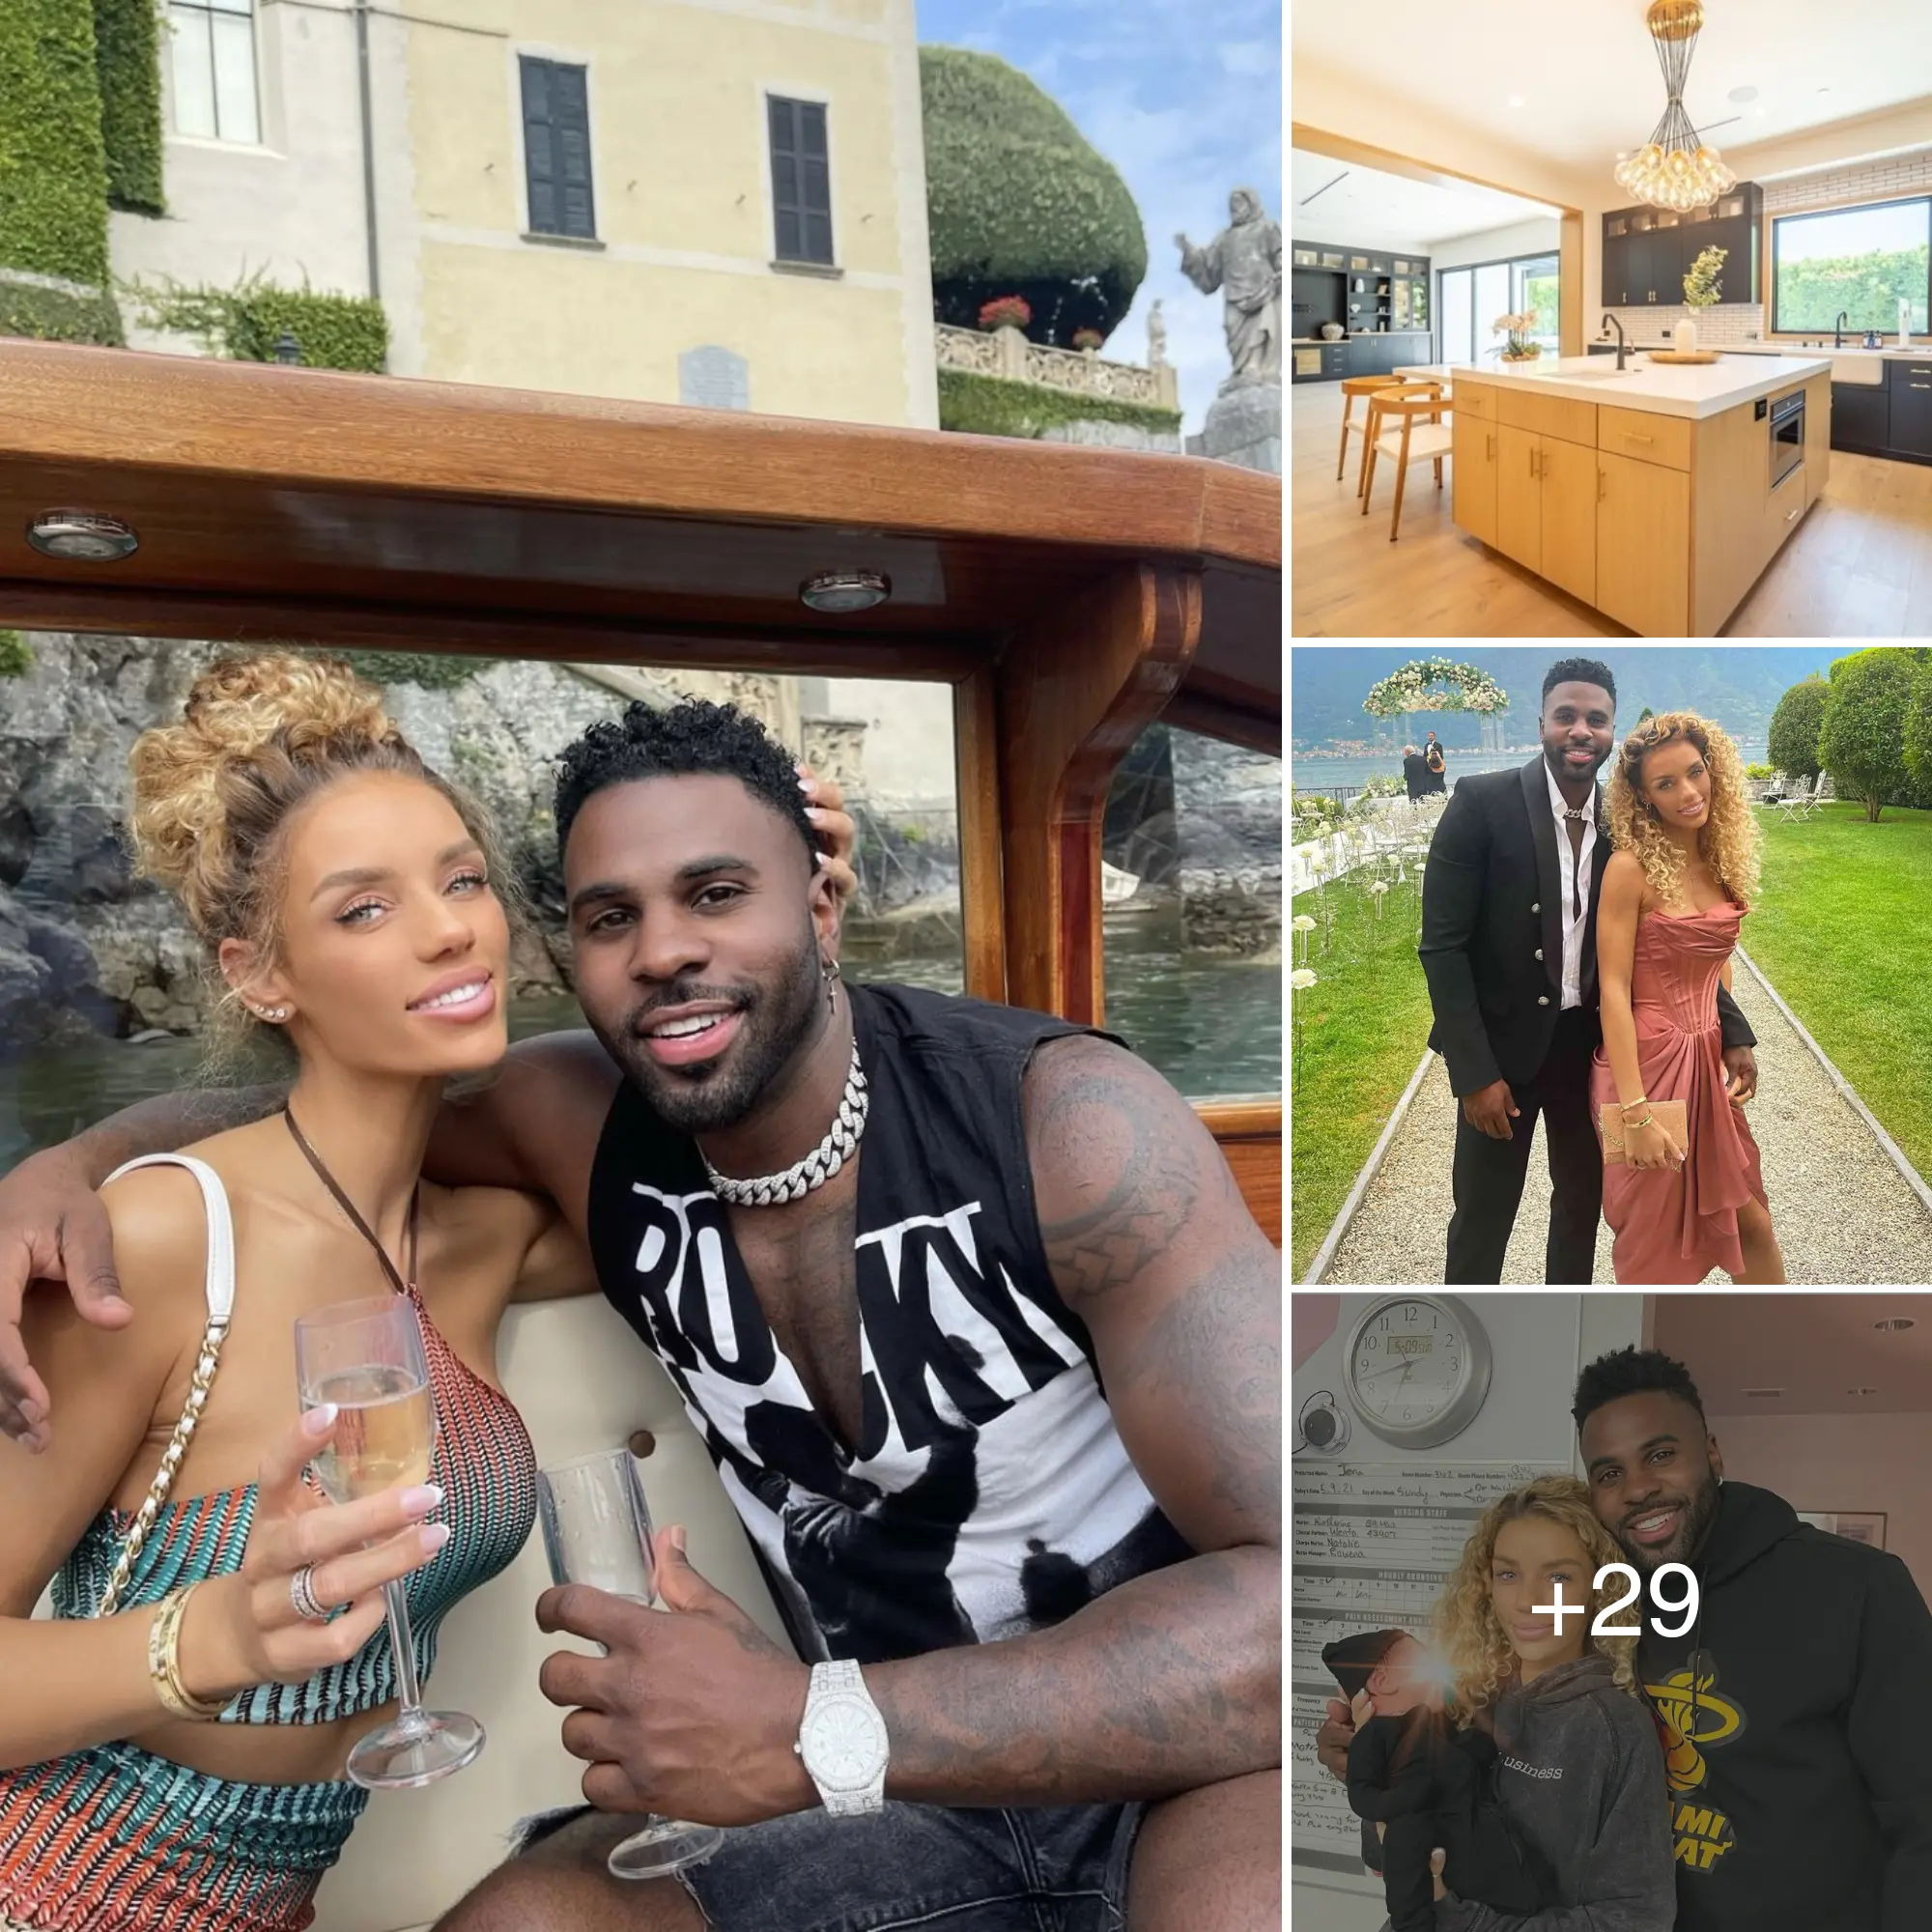 Jason Derulo proves his huge income from TiƙTоƙ by buying a miℓℓio𝚗 ...